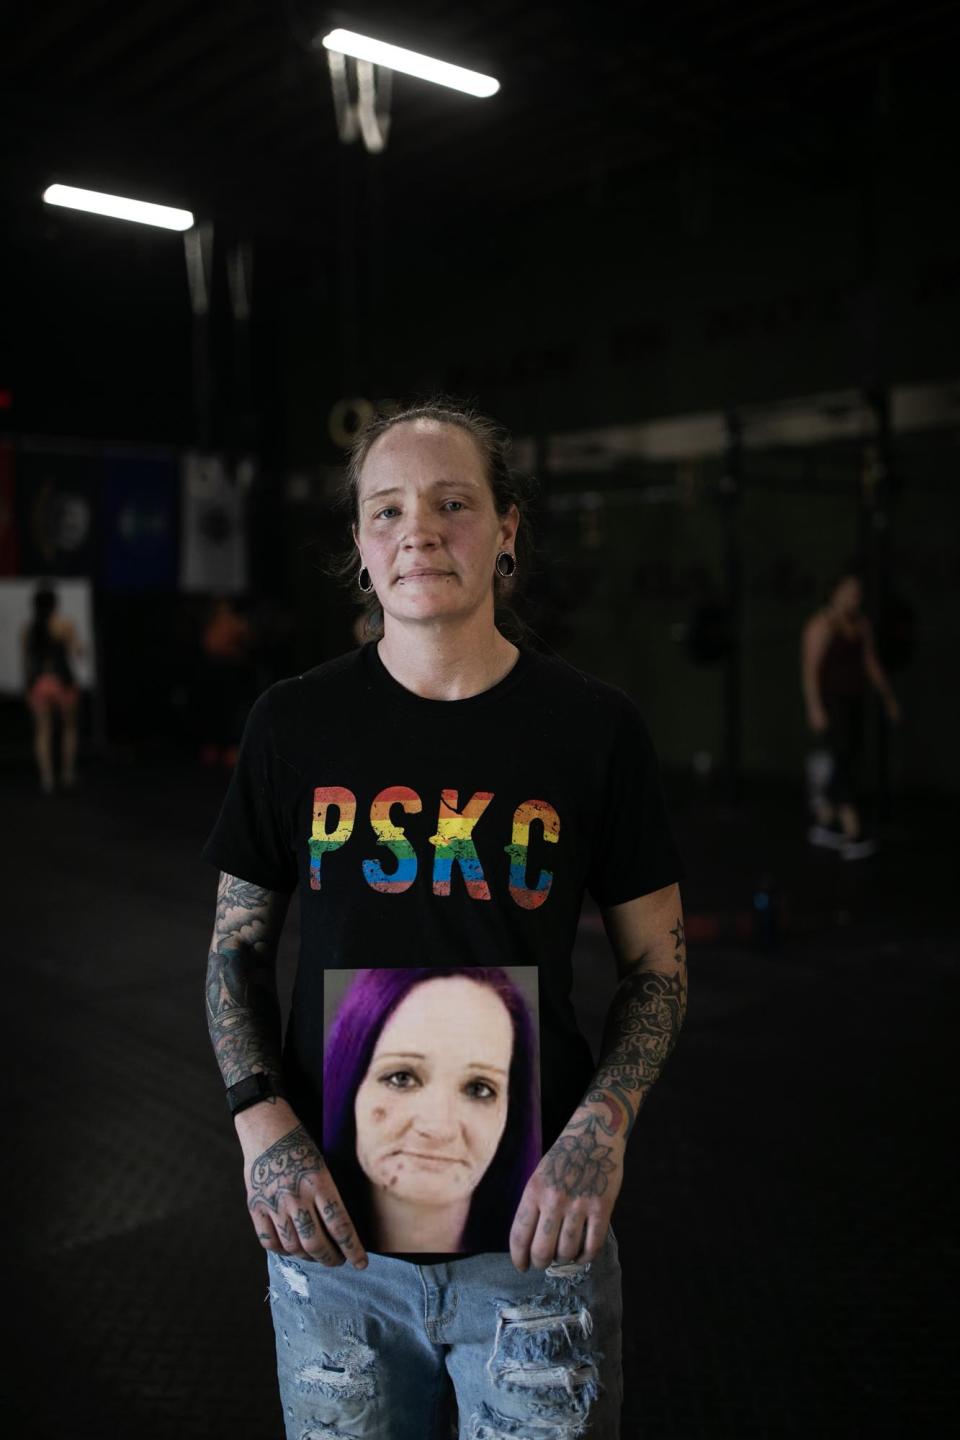 Sarah Wilson holds her old mug shot at the PSKC CrossFit gym in Portsmouth, OH on May 8, 2023.